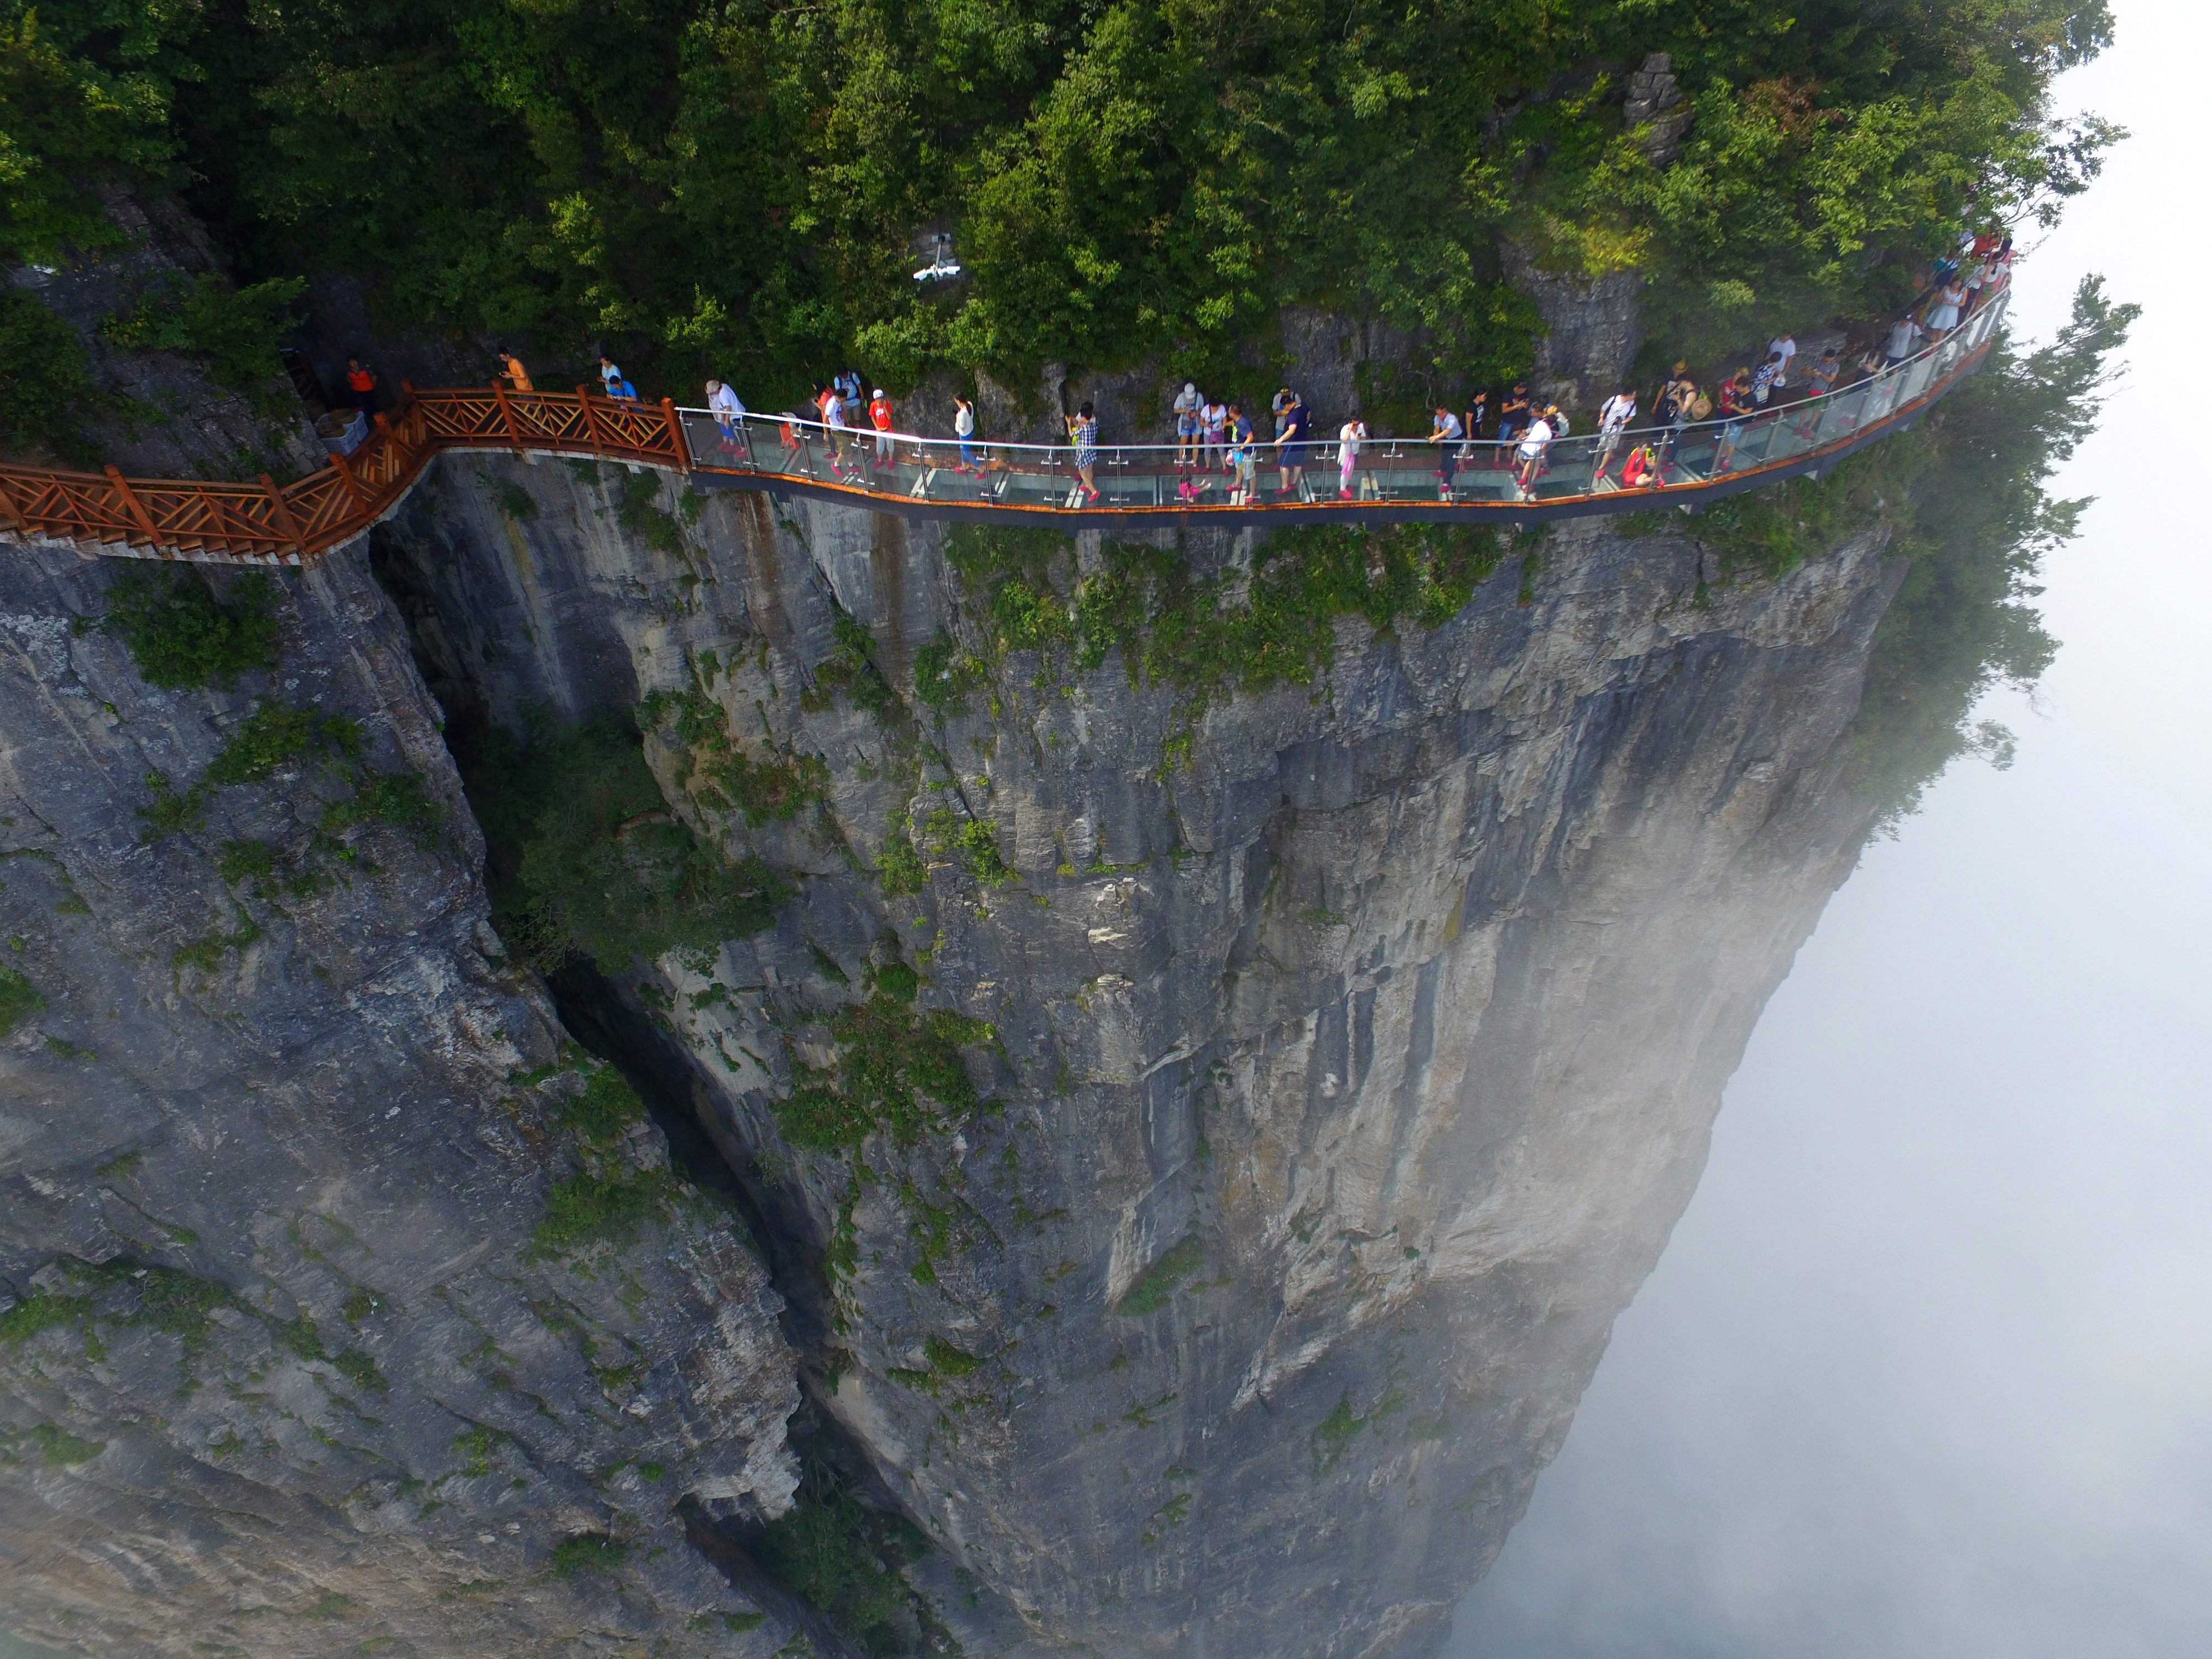 Tourists walking on the glass skywalk clung the cliff of Tianmen Mountain, on Aug. 1, 2016 in Zhangjiajie, China. (VCG/Getty Images)